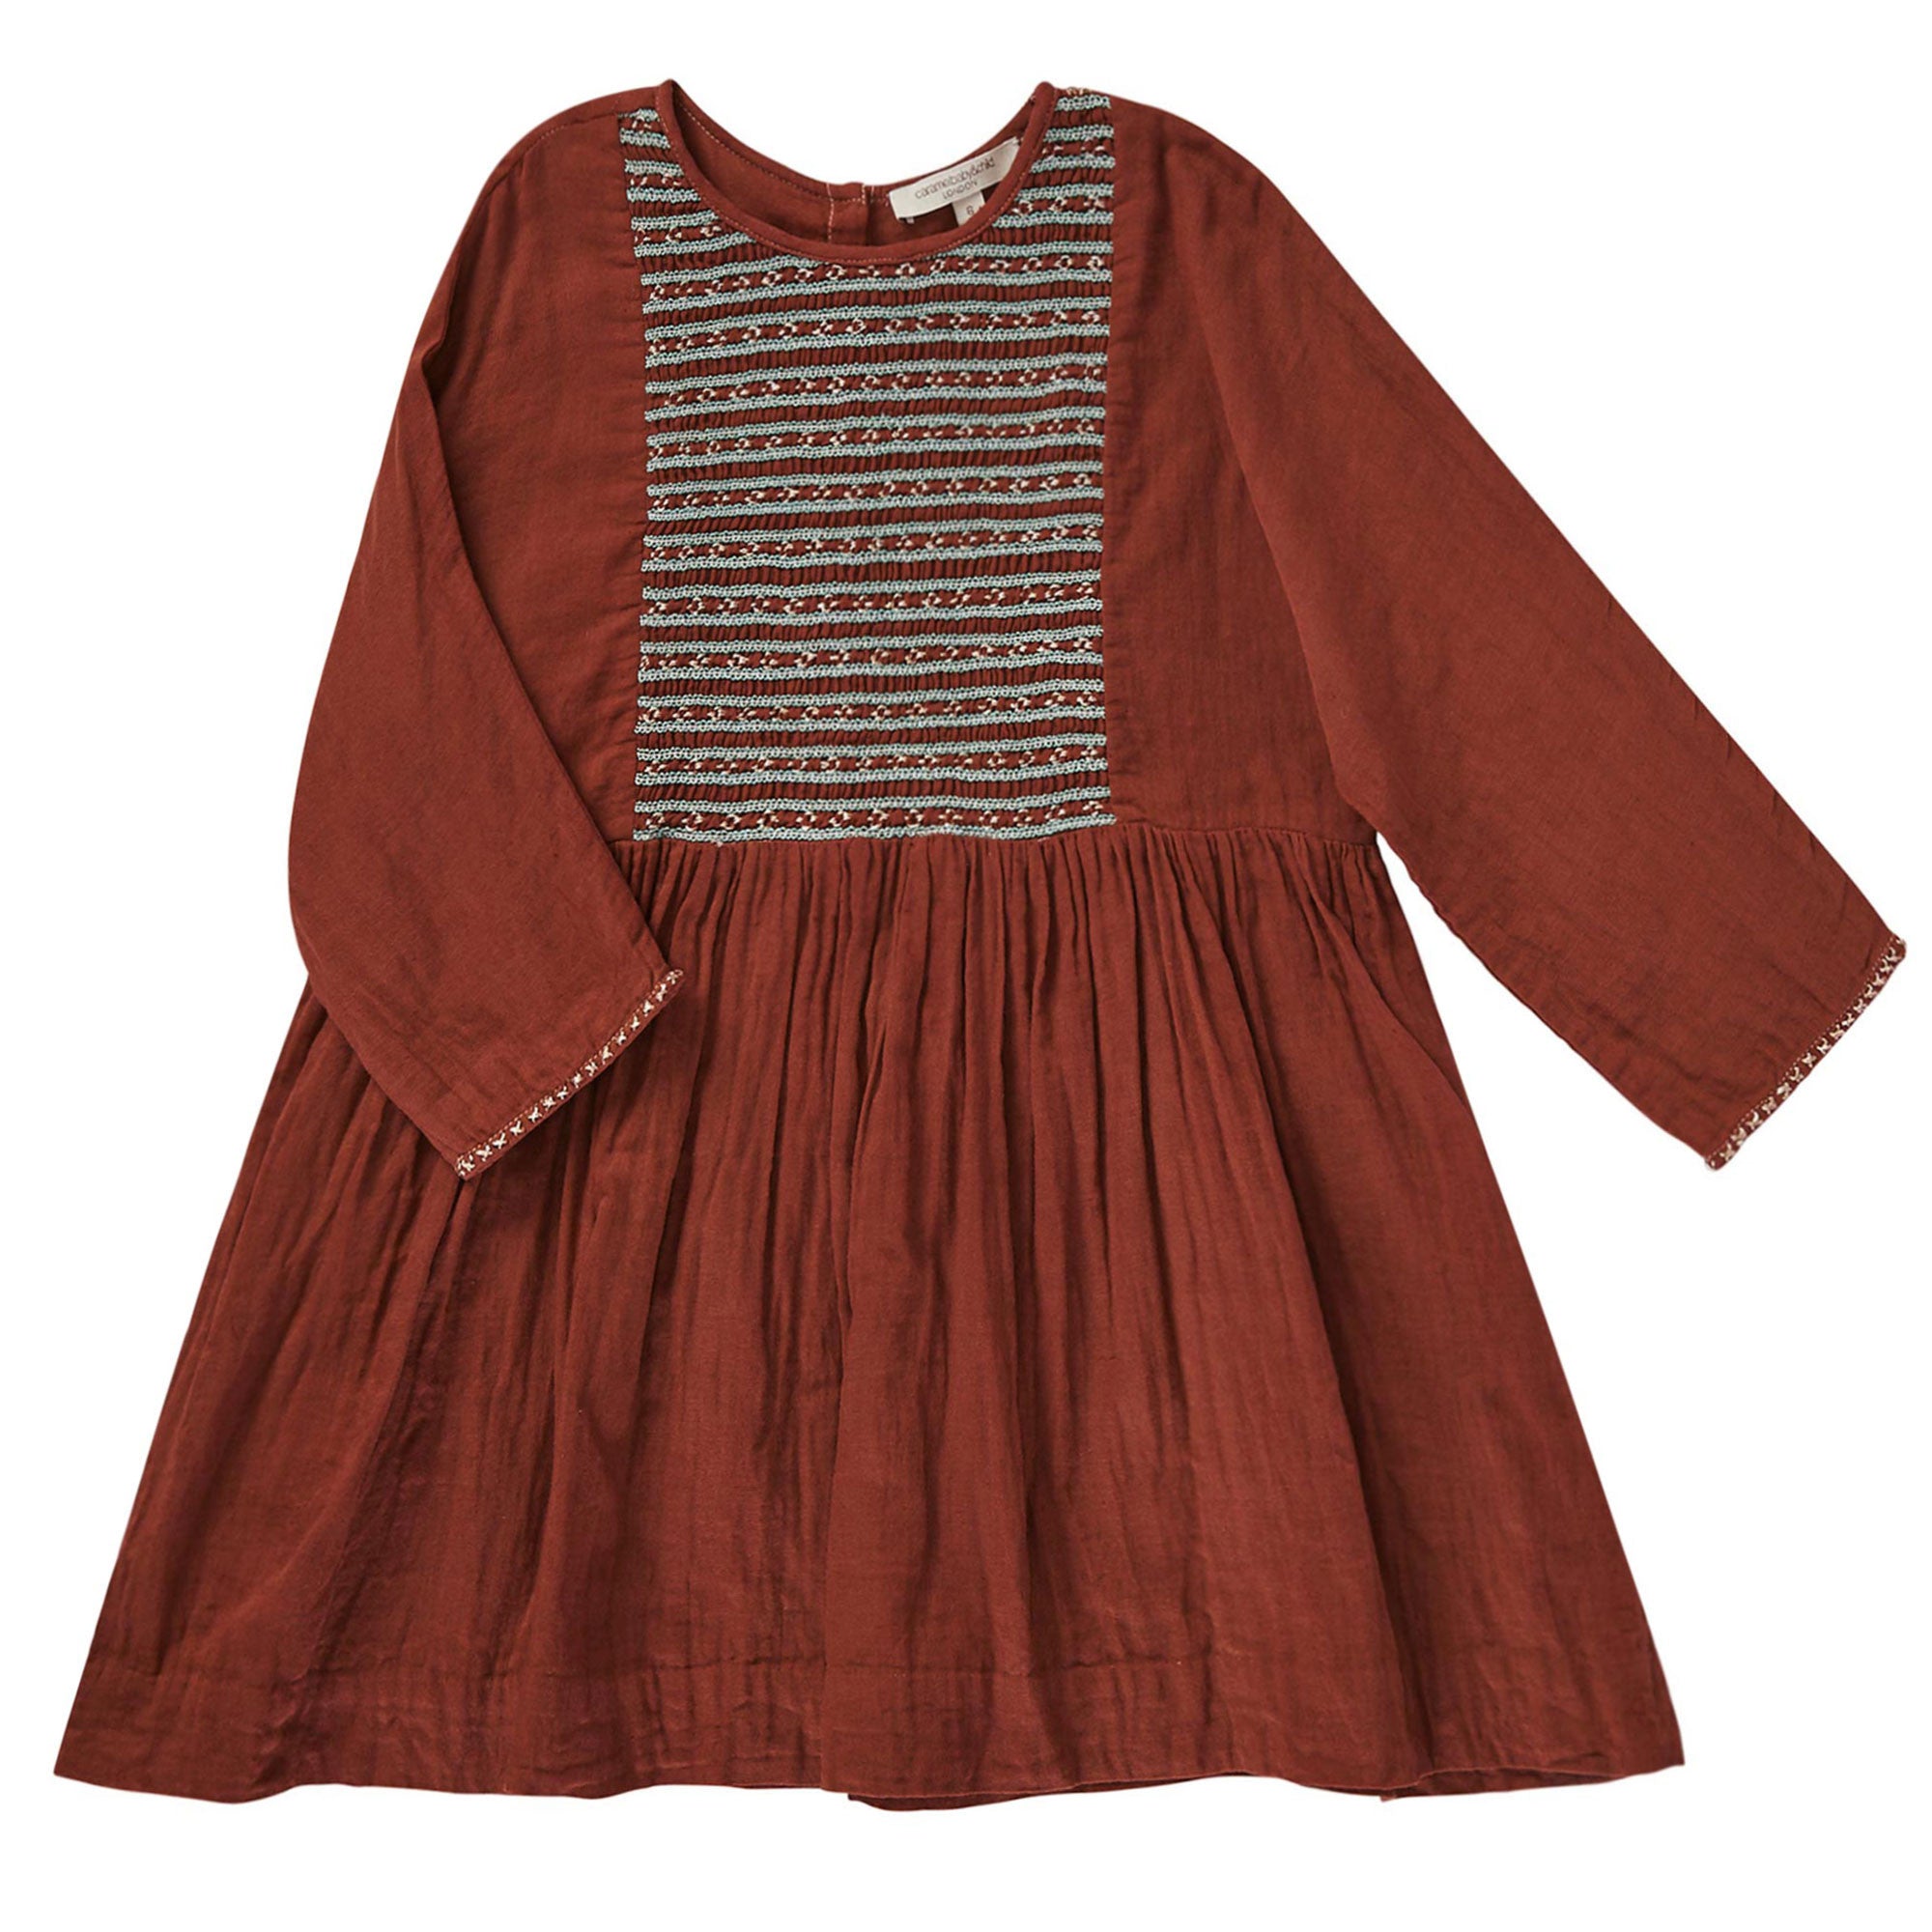 Girls Brown Dress With Embroidery Trims - CÉMAROSE | Children's Fashion Store - 1